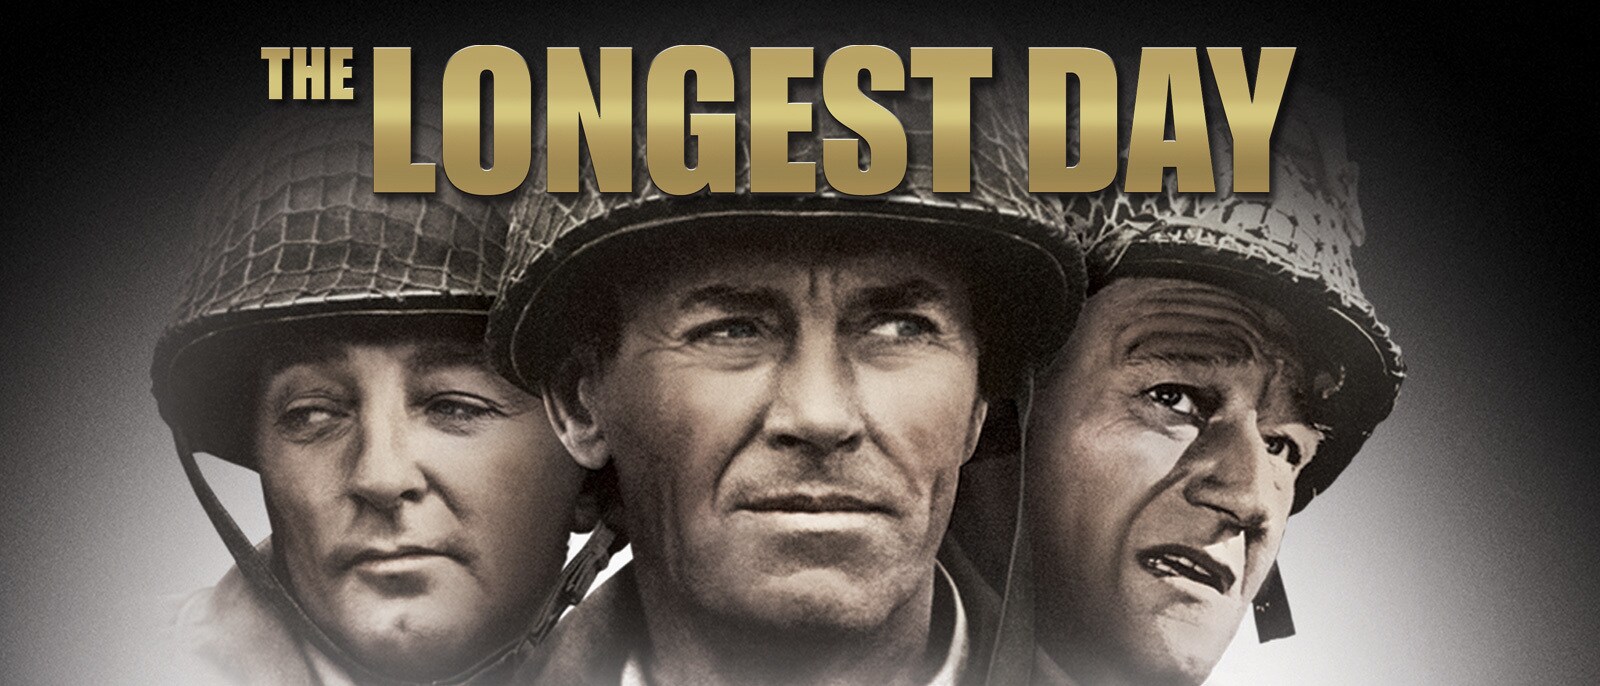 42 Facts about the movie The Longest Day